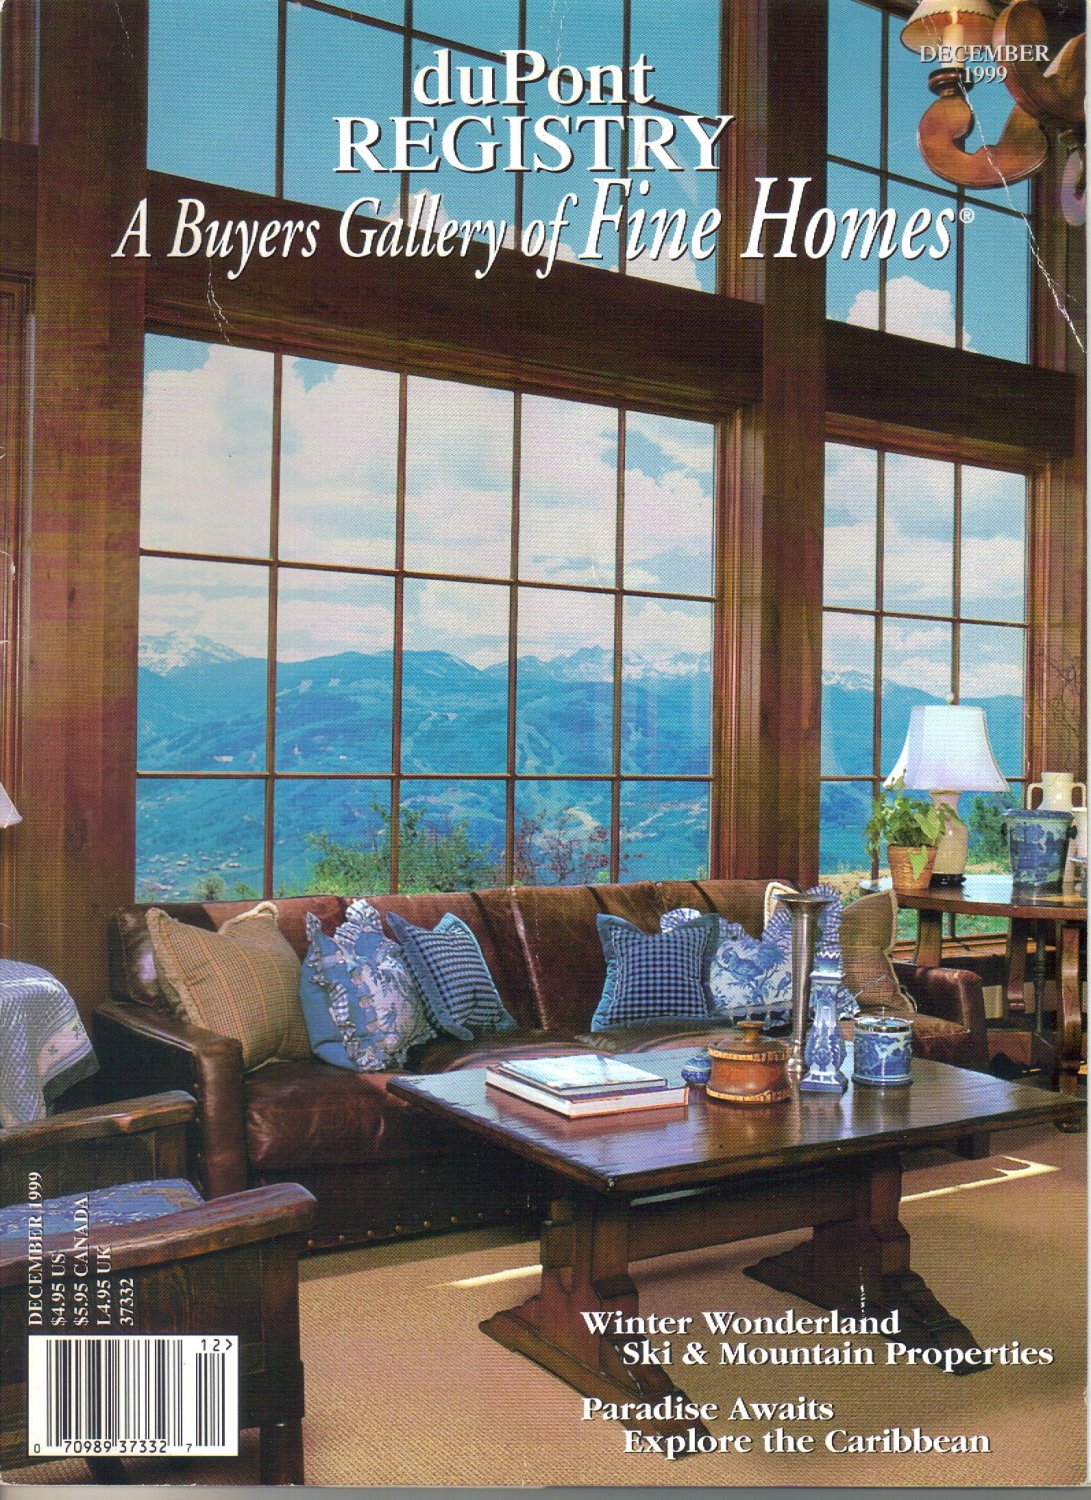 Dupont Registry A Buyers Gallery Of Fine Homes Magazine December 1999